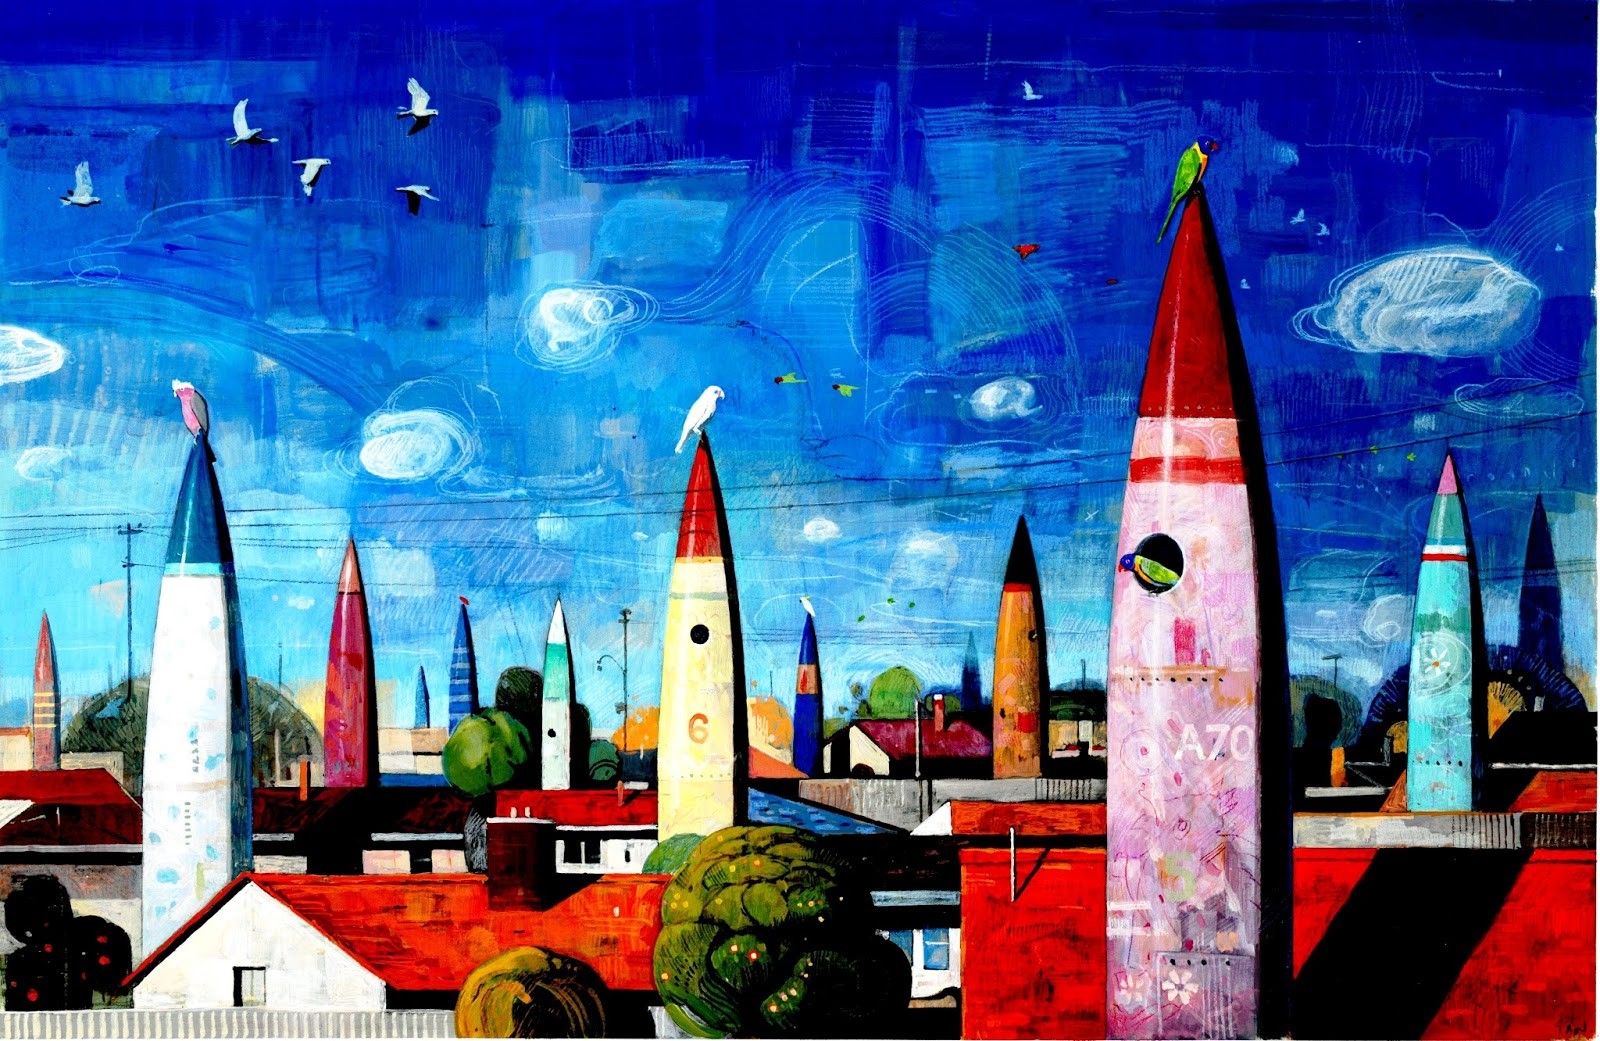 General 1600x1041 digital art fantasy art architecture building house artwork painting rocket town colorful birds clouds rooftops missiles trees